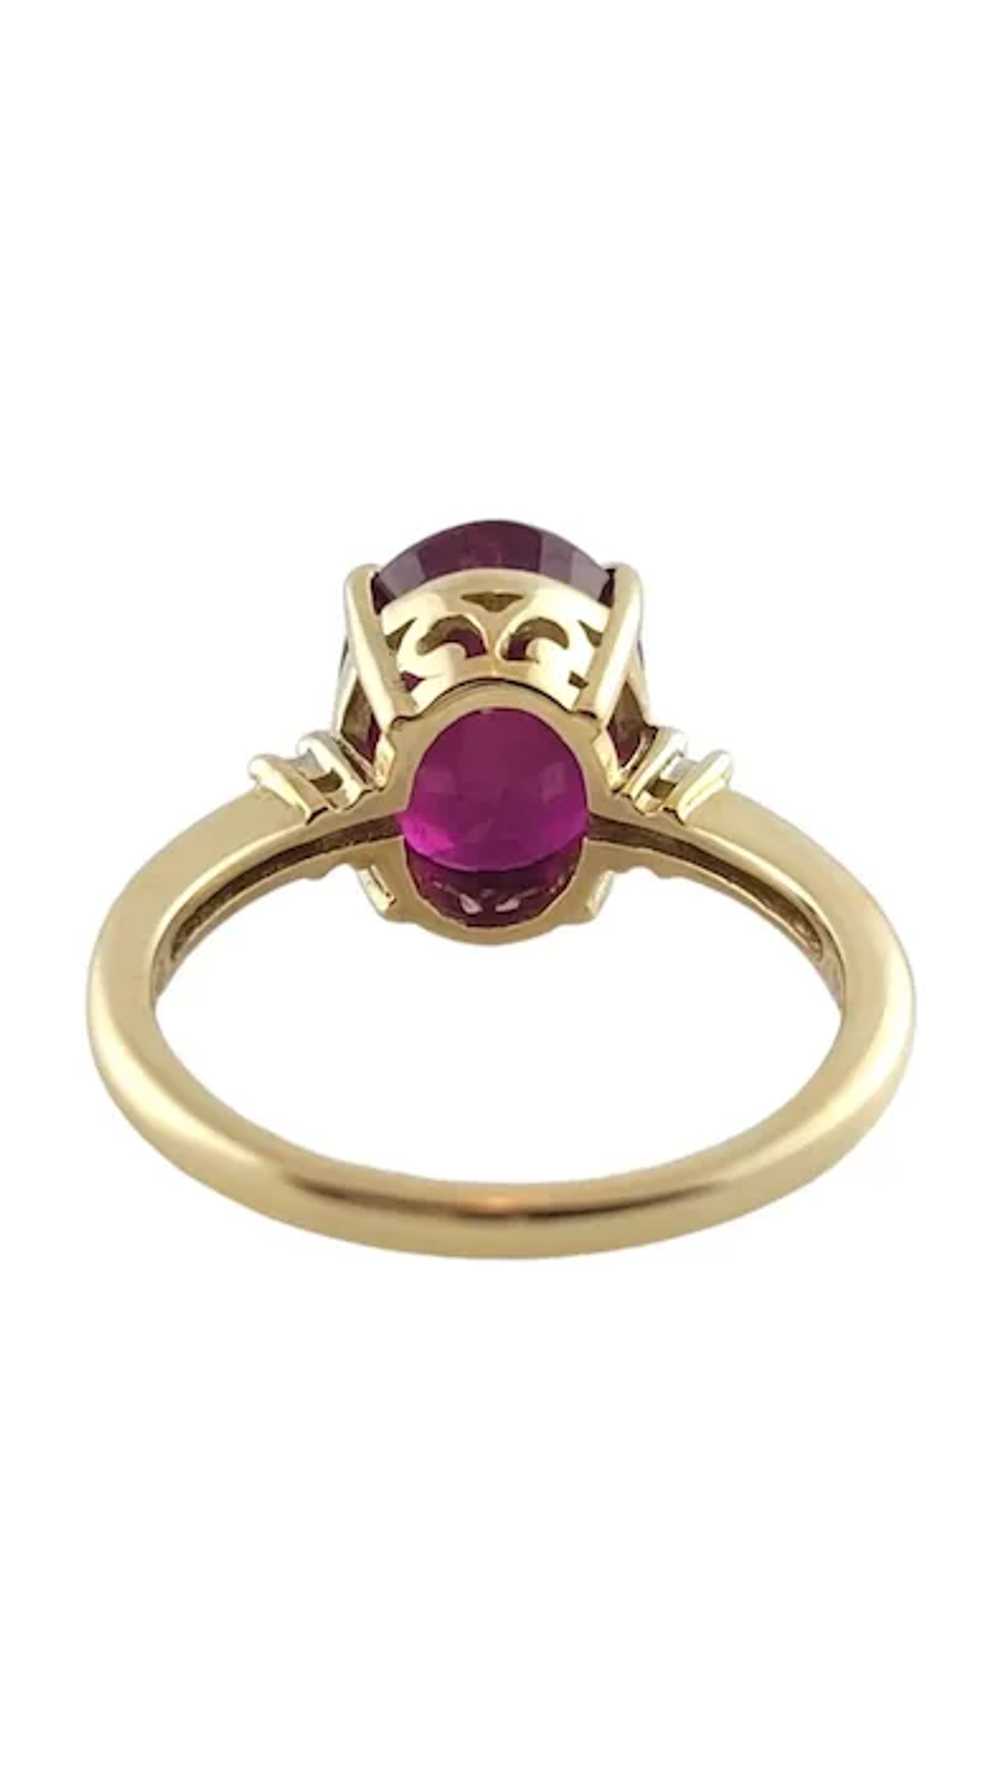 10K Yellow Gold Glass-Filled Ruby Ring Size 5.25 … - image 6